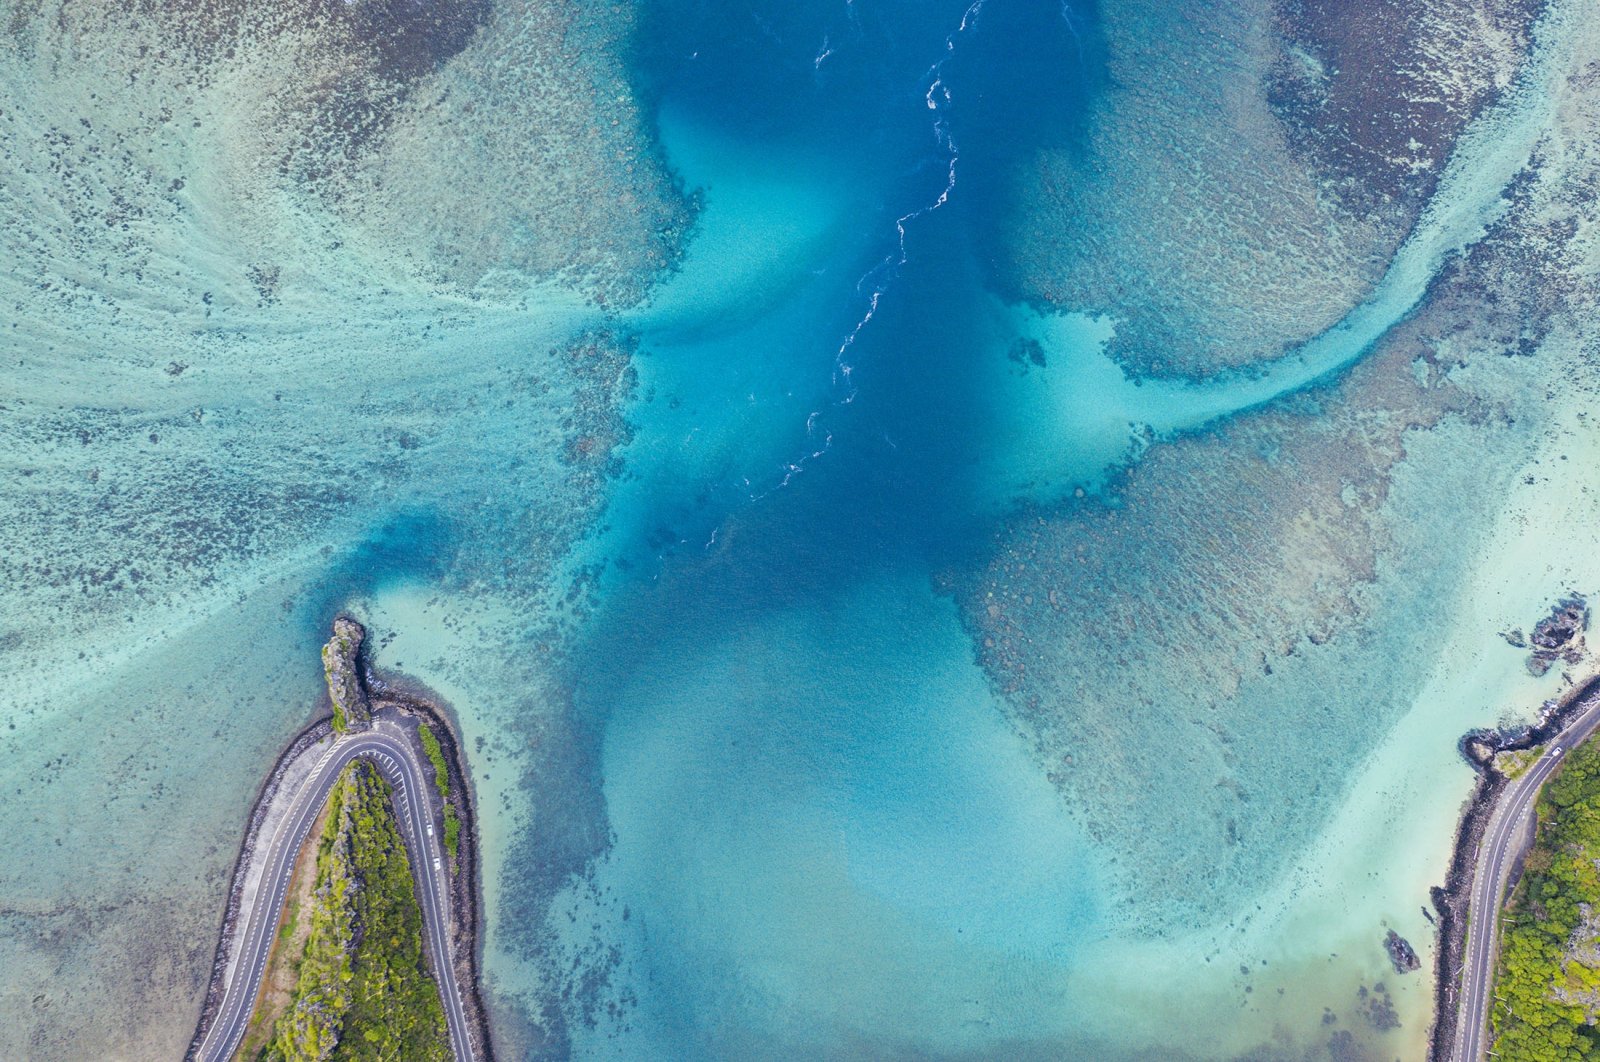 An aerial view of turquoise waters of a lagoon surrounding the Maconde Viewpoint along the coastal road, aerial view at Bel Ombre, Baie Du Cap, Indian Ocean. (Getty Images)